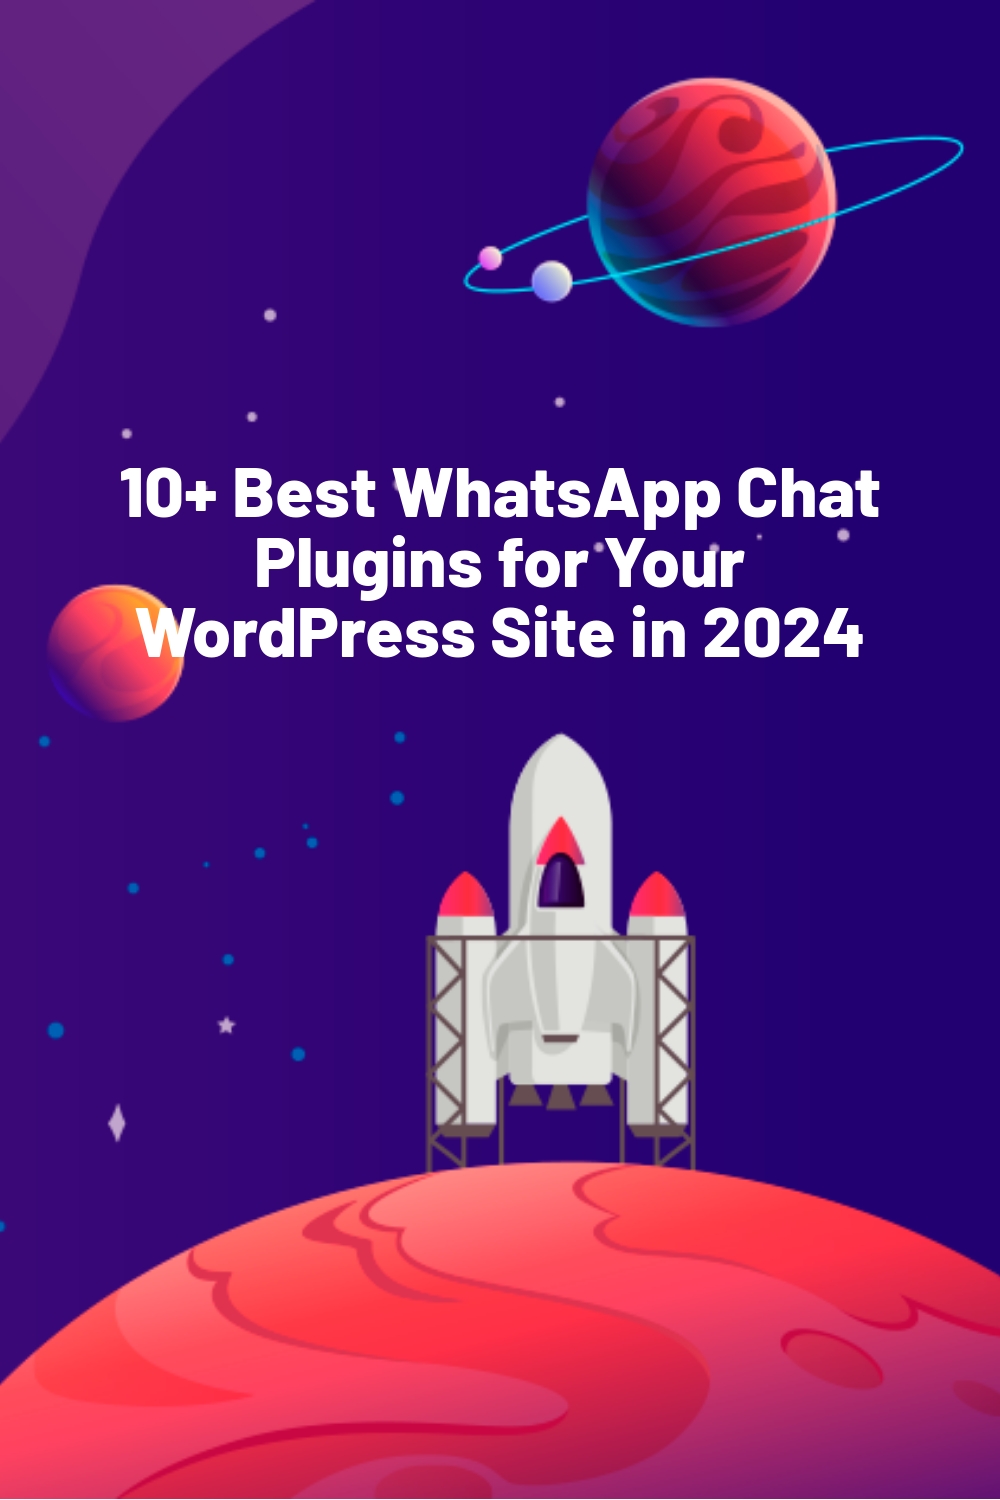 10+ Best WhatsApp Chat Plugins for Your WordPress Site in 2024